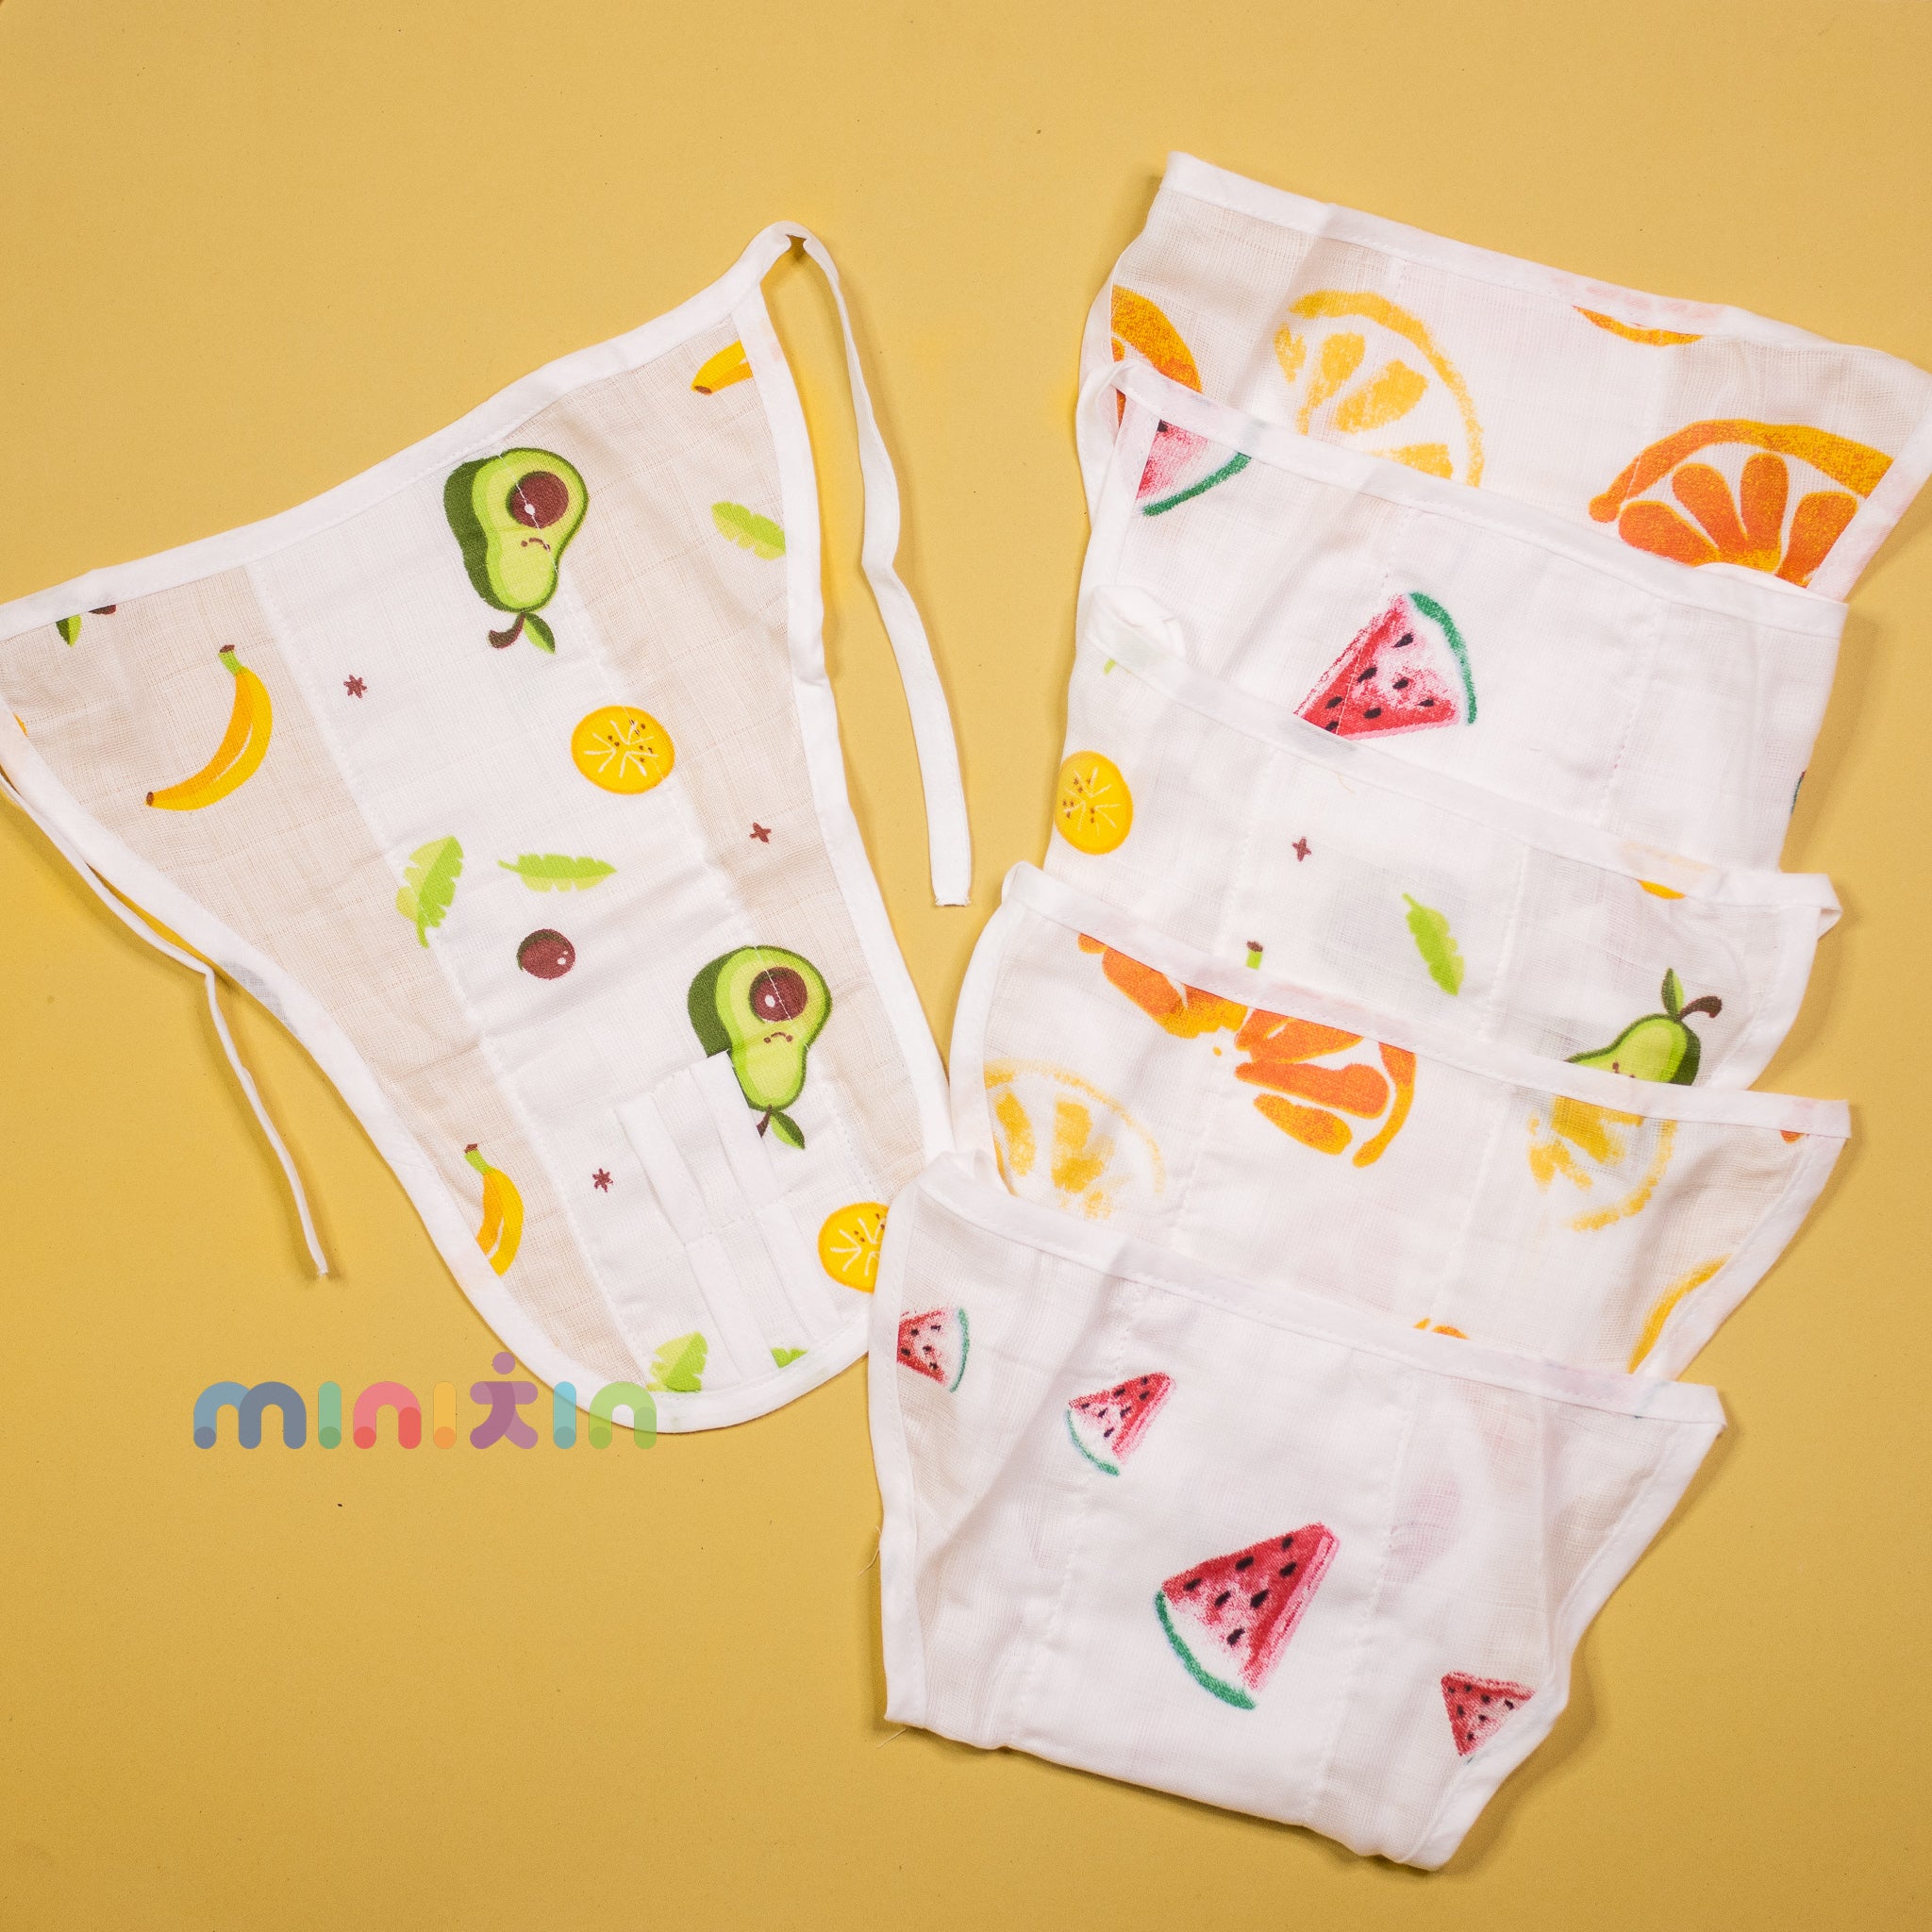 Extra Soft Organic Cotton Muslin Nappies for NewBorn Baby - Pack of 6 - Assorted Prints - The Minikin Store